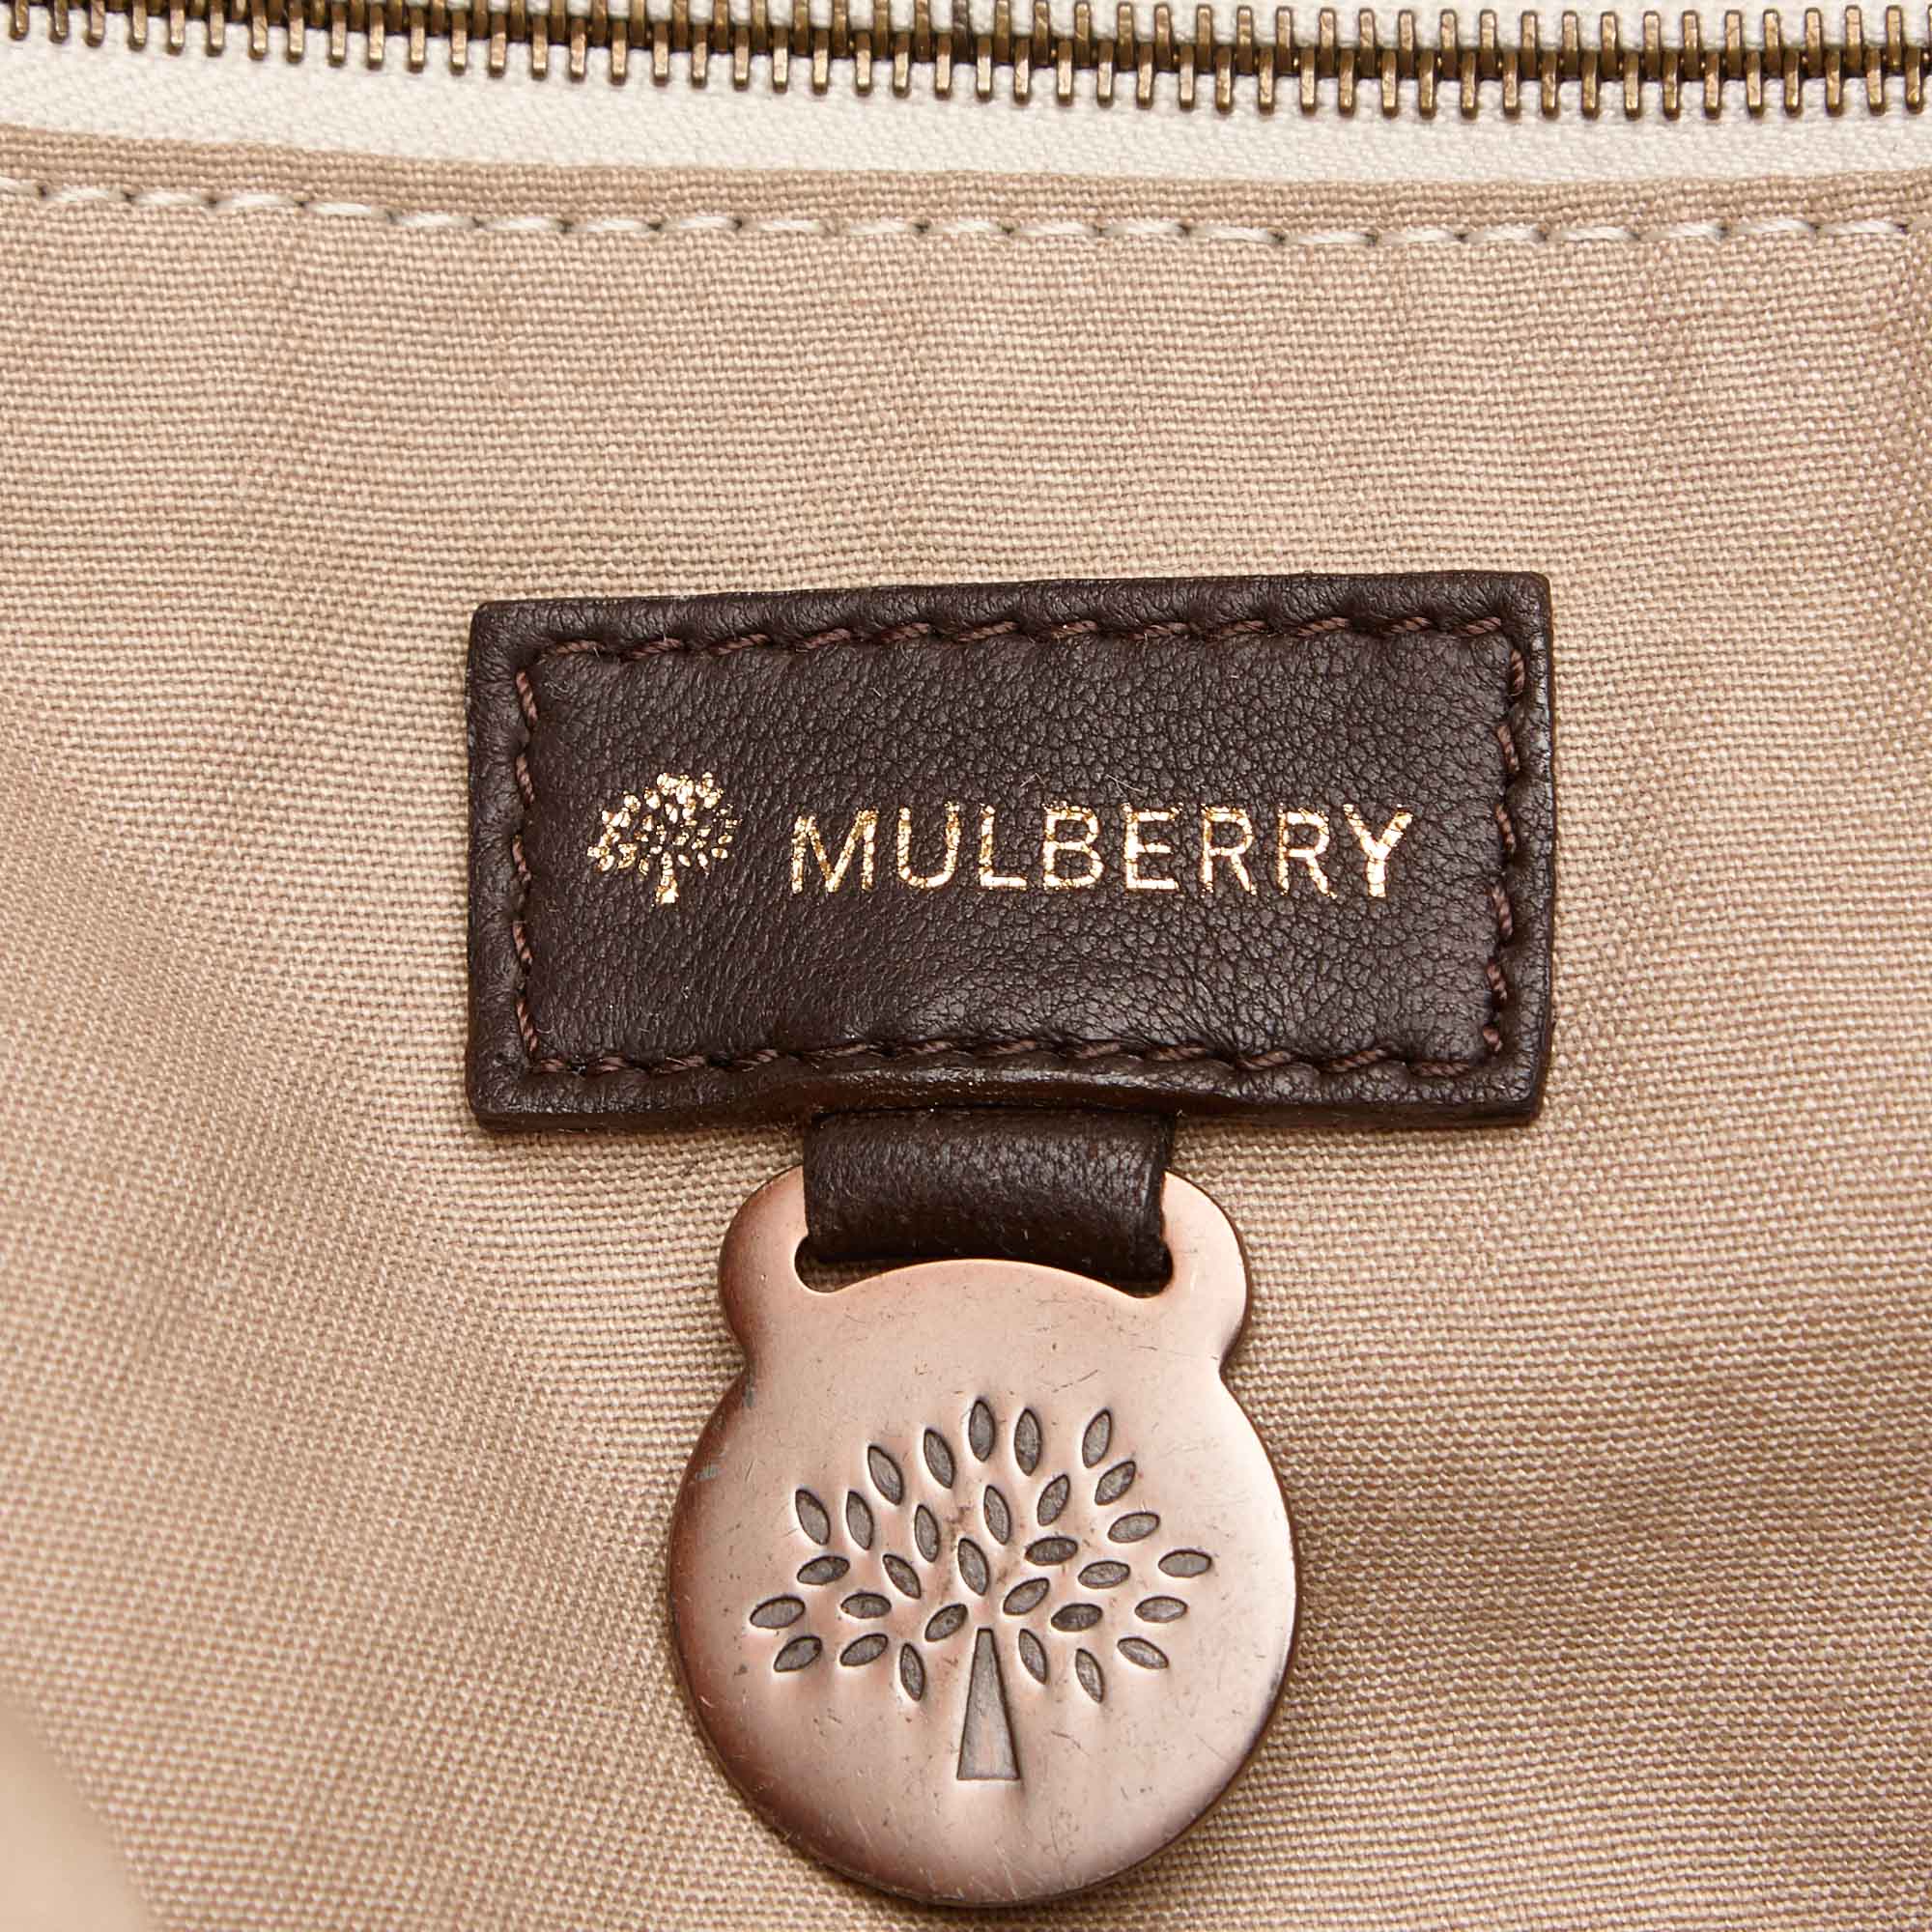 The Mulberry Icons And Their Name Sakes – ARMCANDY BAG CO